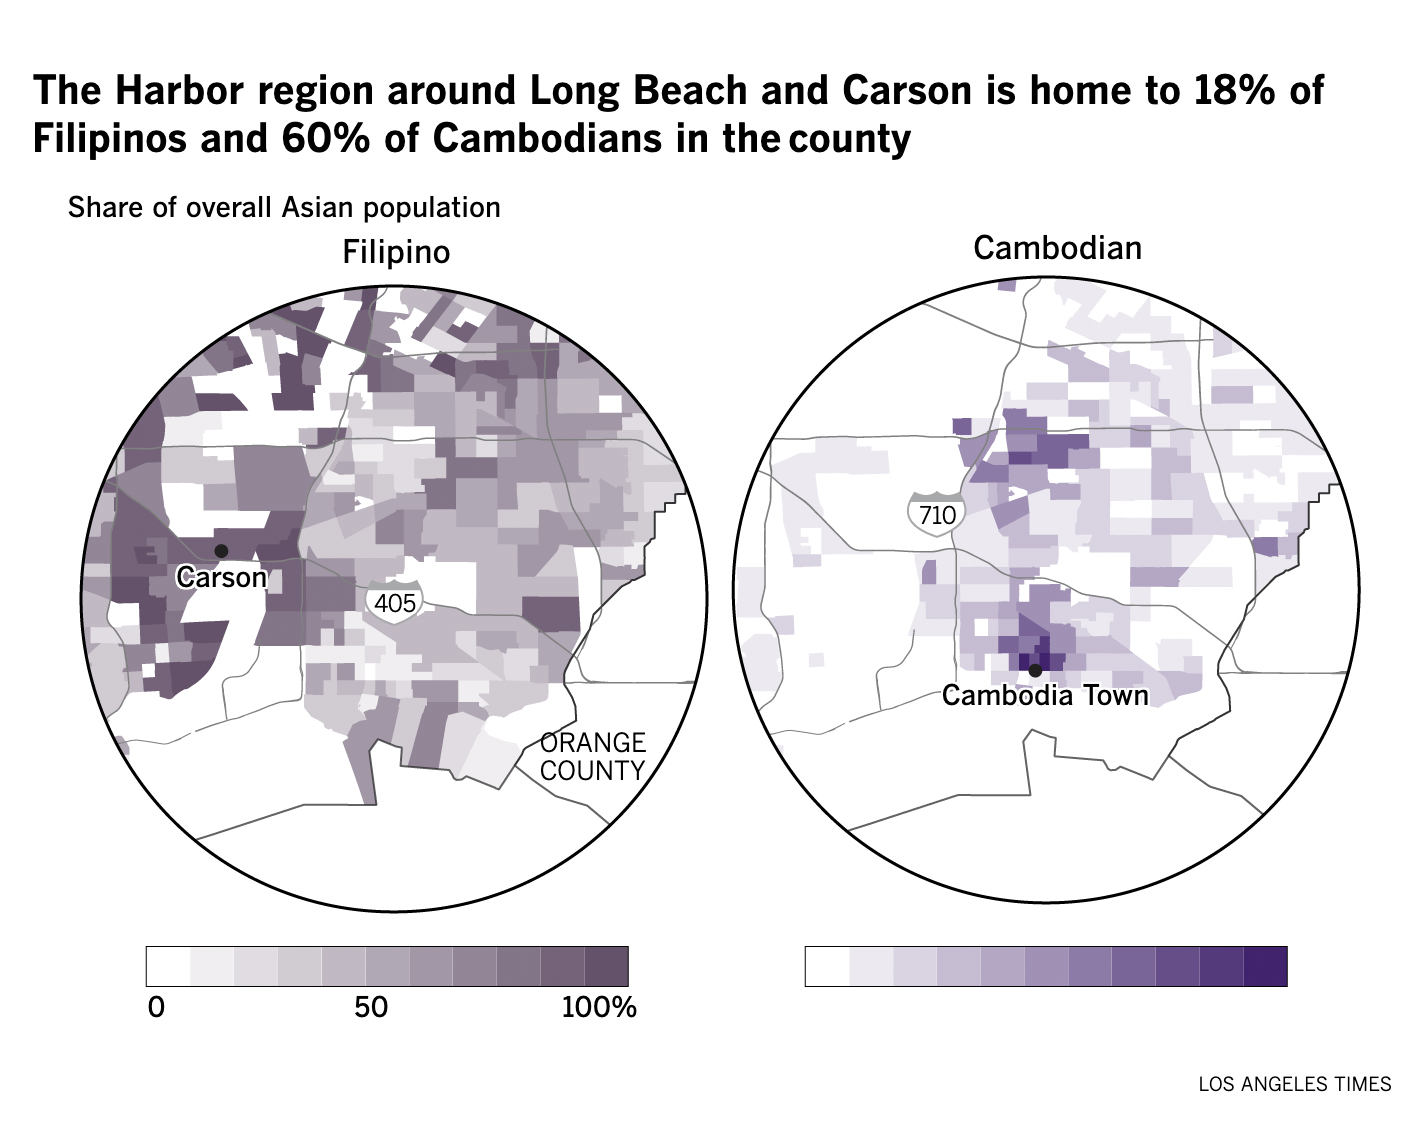 A diptych of choropleth maps showing the Filipino and Cambodian shares of the total Asian population in the Harbor area of Los Angeles County.